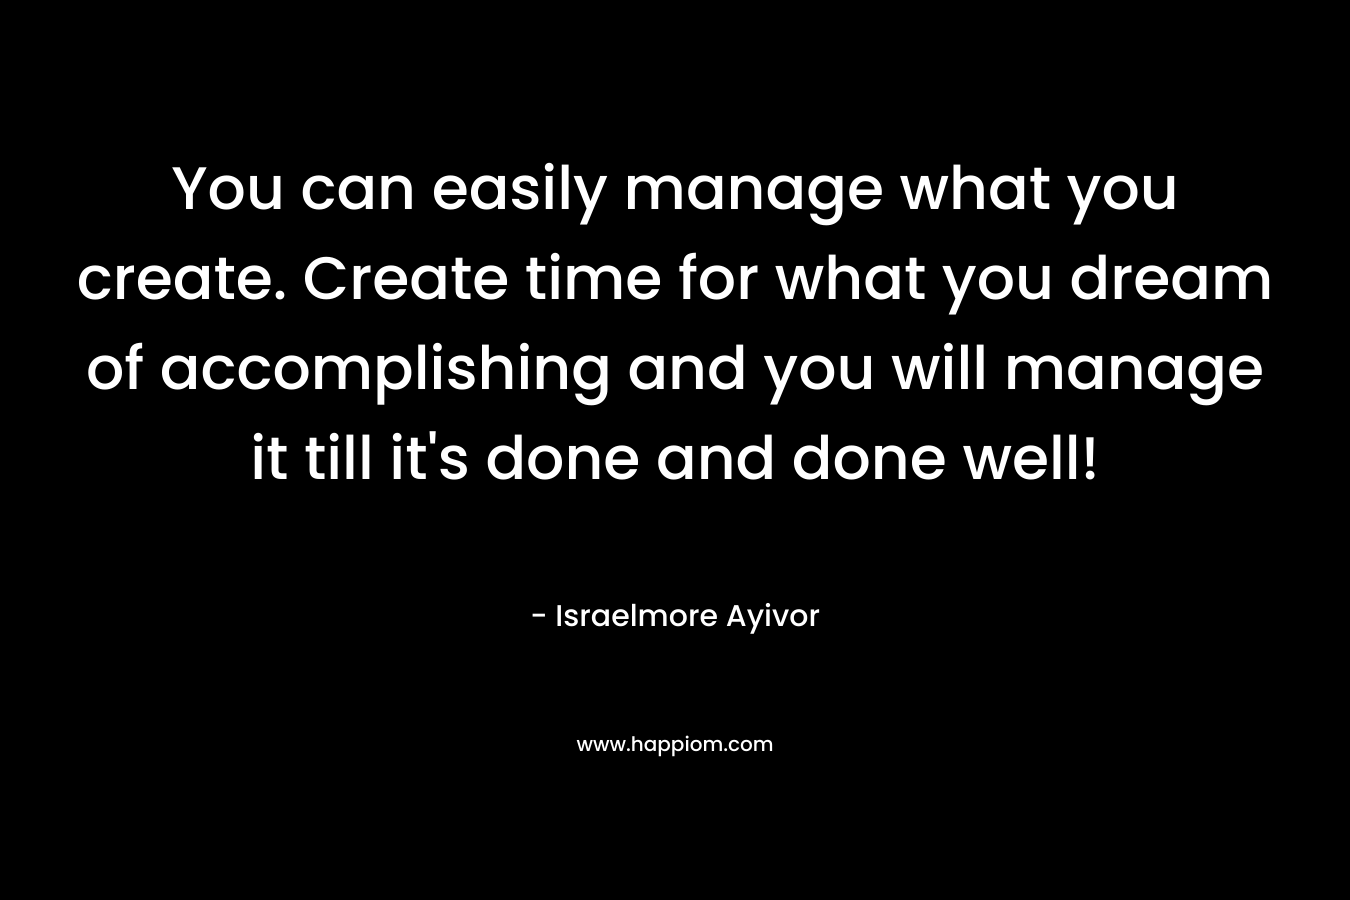 You can easily manage what you create. Create time for what you dream of accomplishing and you will manage it till it’s done and done well! – Israelmore Ayivor